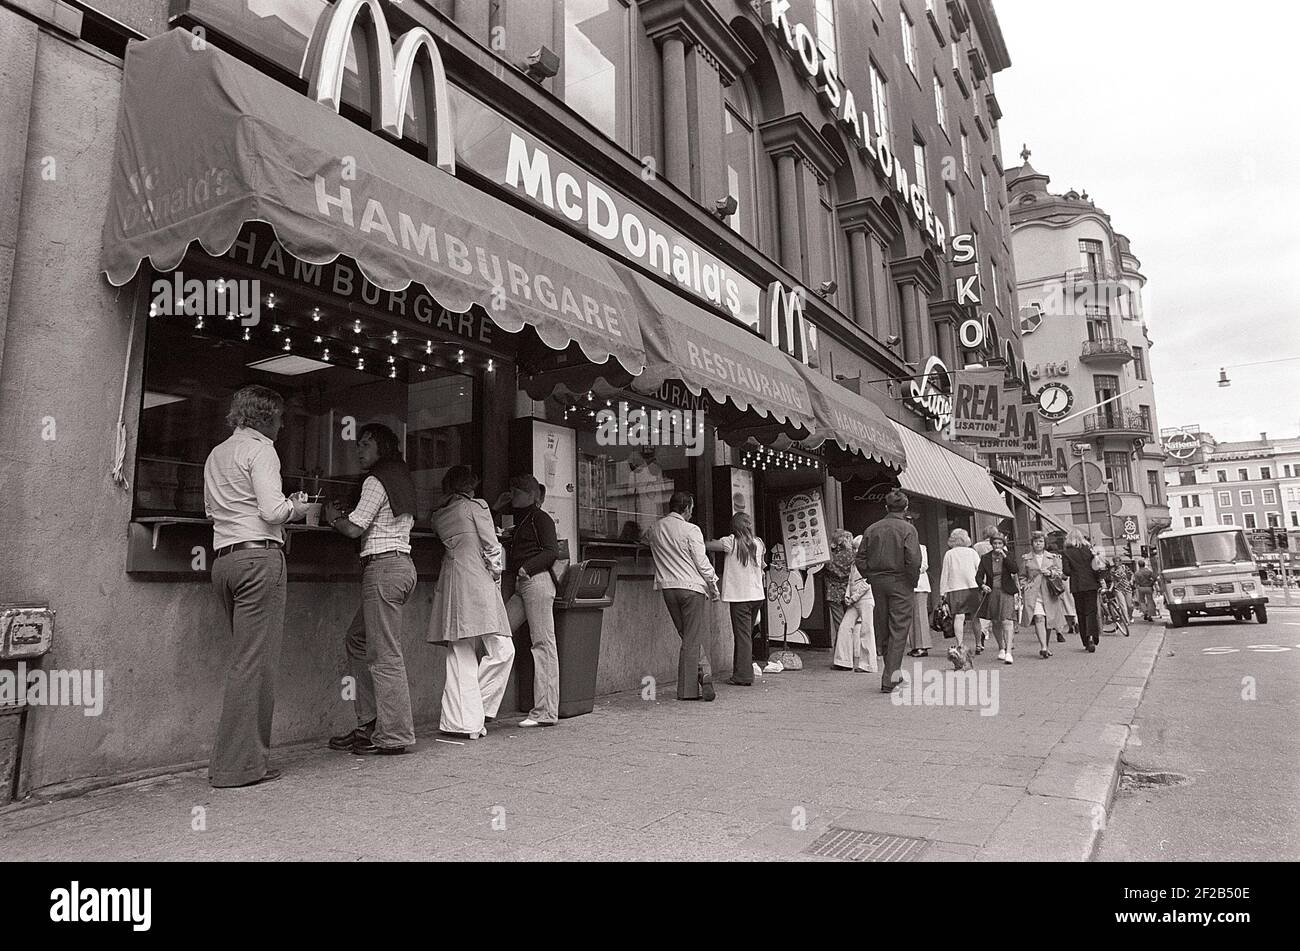 Fast food in the 1970s. Swedish businessman Paul Lederhausen obtains the swedish rights to fast-food chain McDonalds and on october 27 1973 opens the very first McDonalds restaurant i Sweden on Kungsgatan in Stockholm. ref 6382 Stock Photo